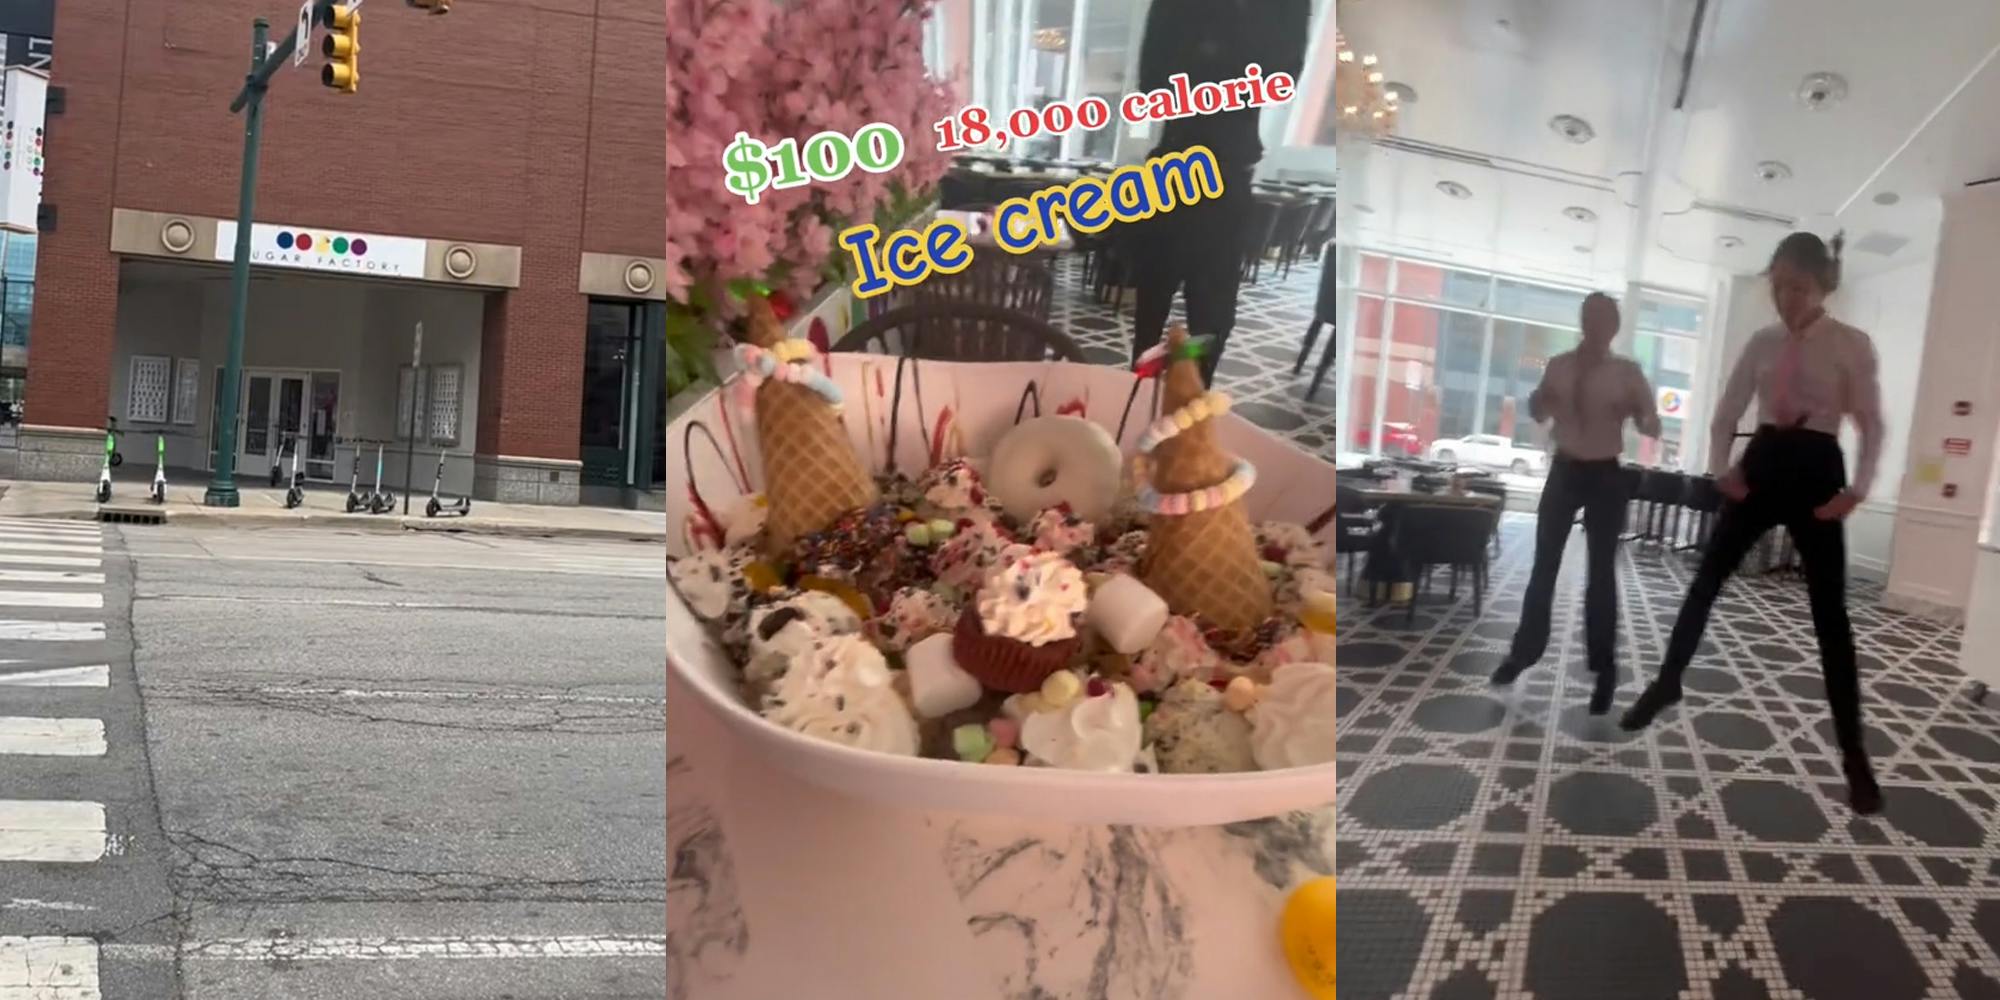 Sugar Factory restaurant view from street (l) ice cream in bowl with caption "$100 18,000 calorie Ice cream" (c) Sugar Factory workers dancing (r)